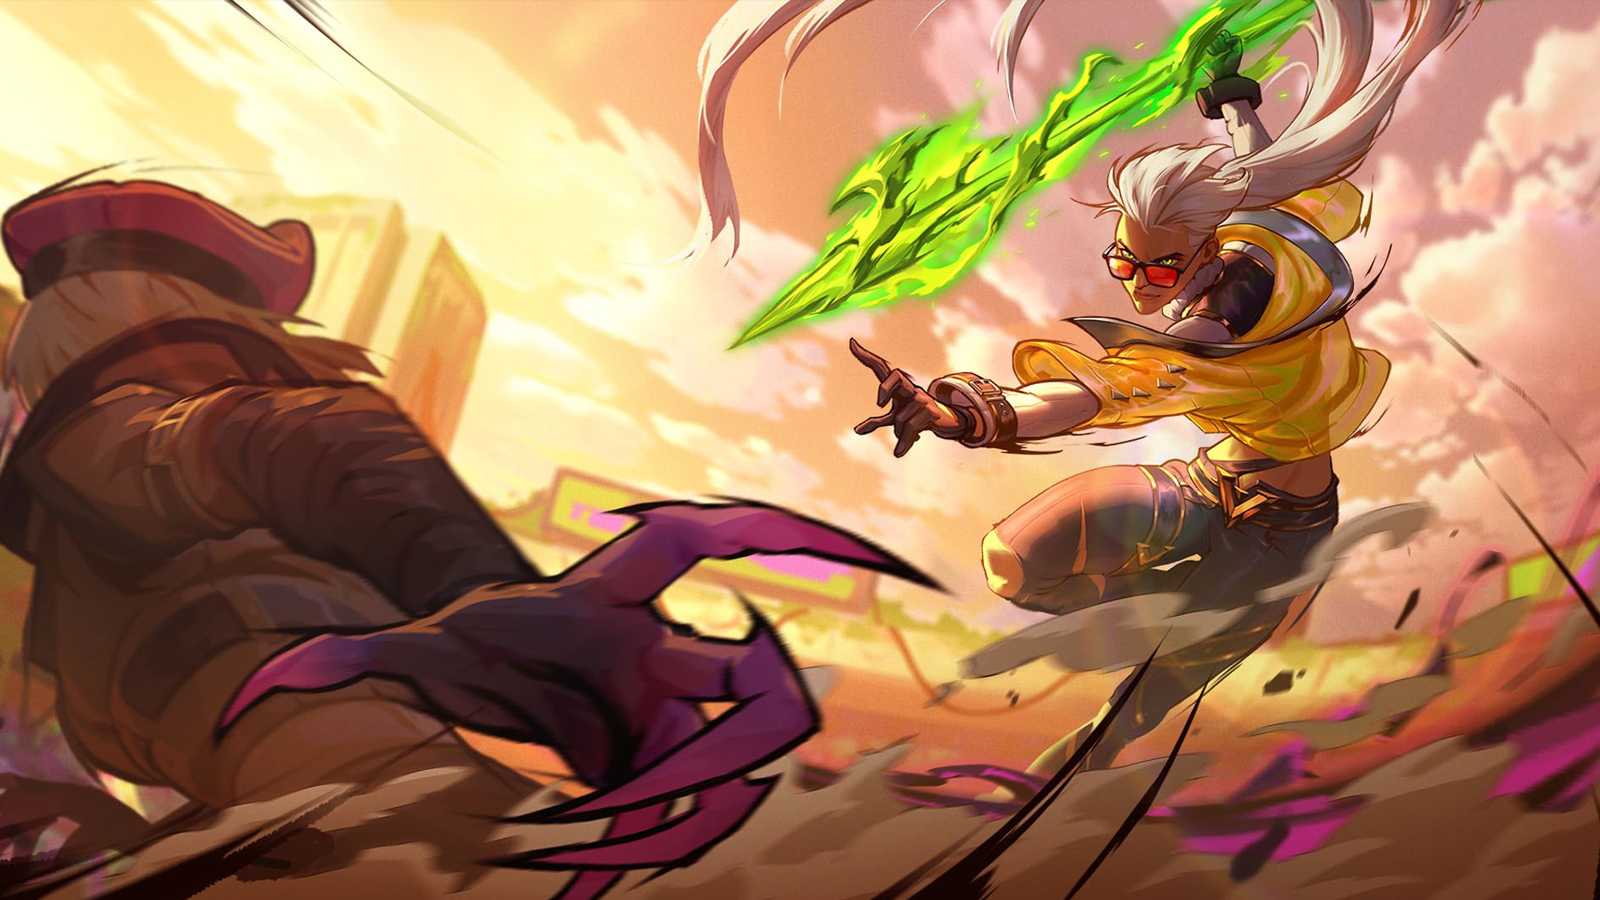 Soul Fighter Nidalee attacks an enemy in the League of Legends Arena as part of the game's new in-game event series.